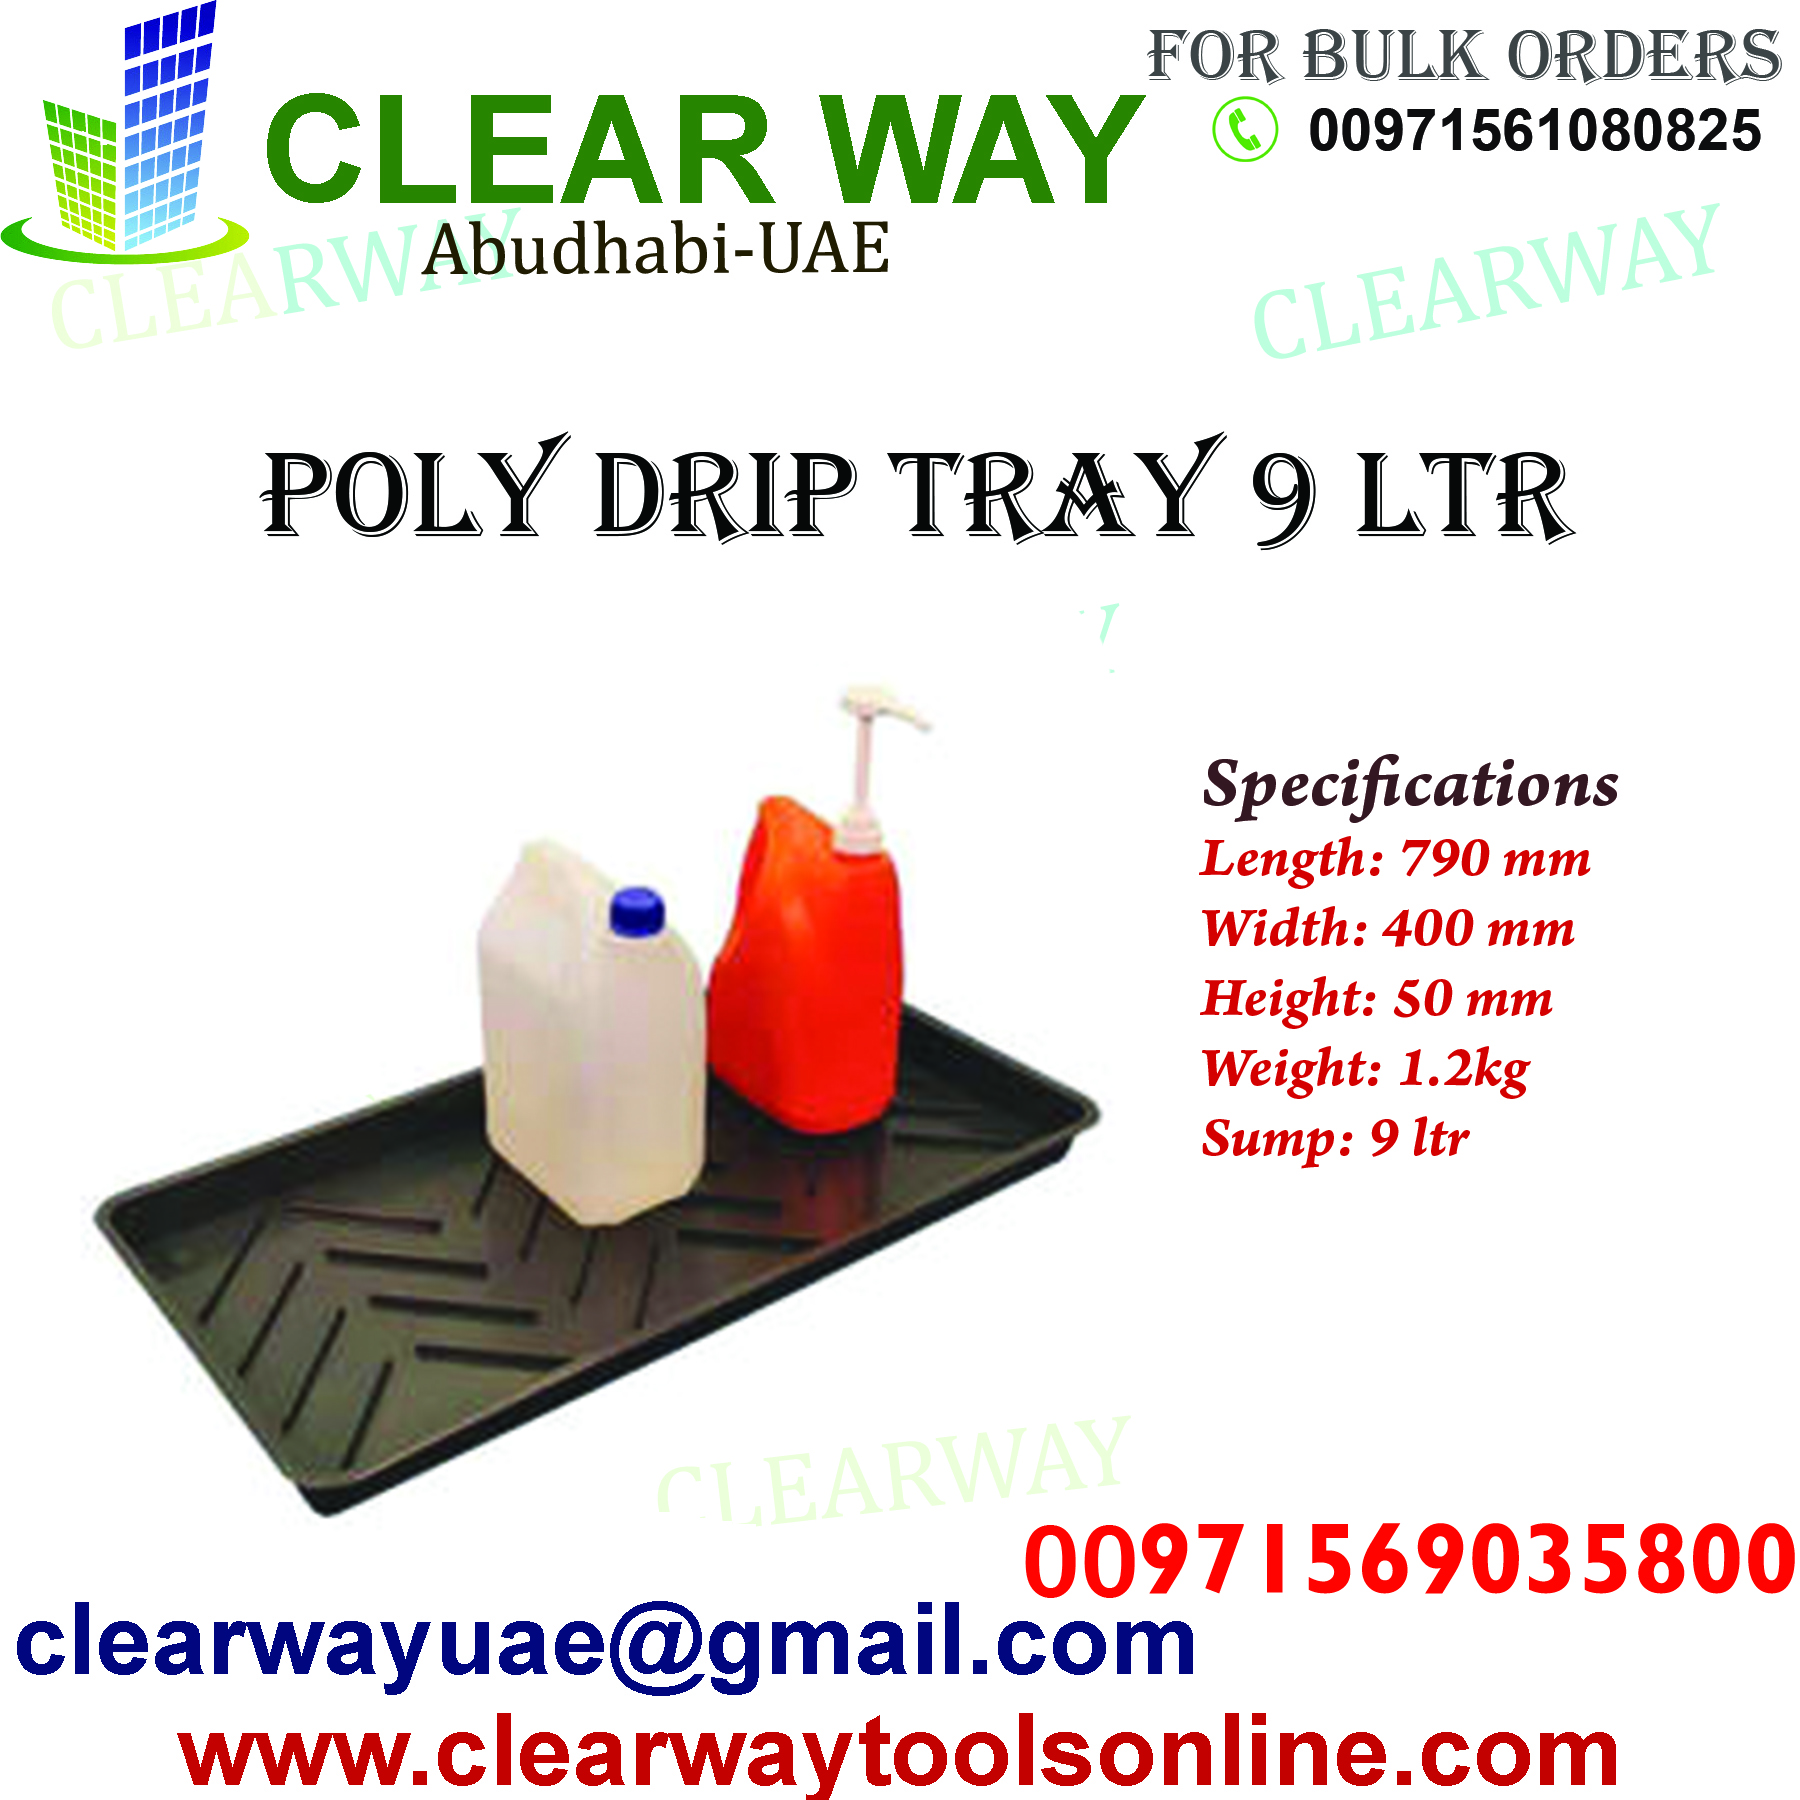 POLY DRIP TRAY 9 LITRE DEALER IN MUSSAFAH , ABUDHABI , UAE BY CLEARWAY